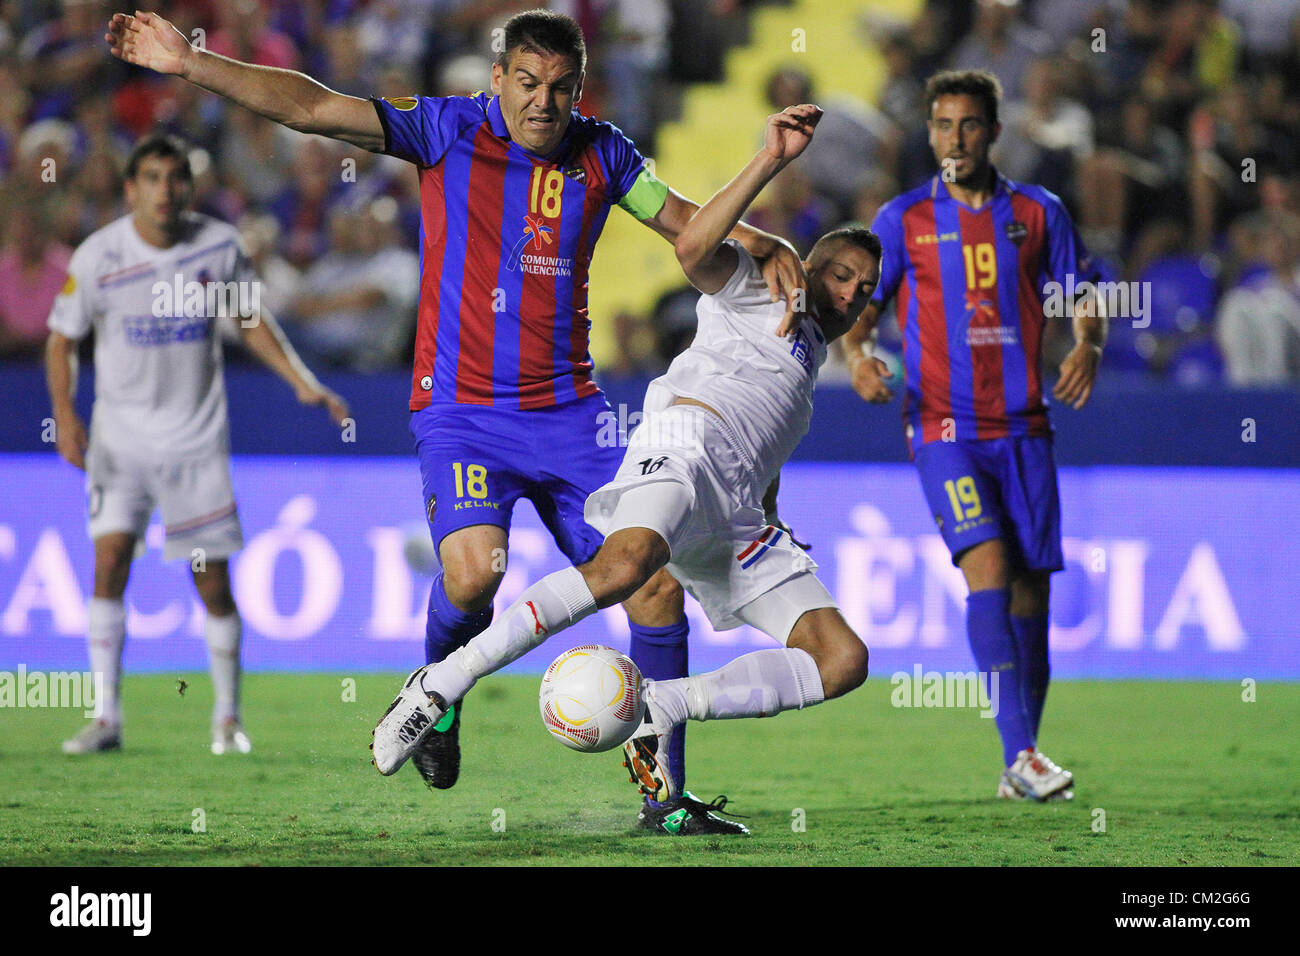 20/09/2012 - Europa League Football Europe, Group Matchday 1, Levante UD vs. Helsingborg - Ballesteeros (left) from Levante UD commits possible penalty against Djurdjic from Helsingborg Stock Photo